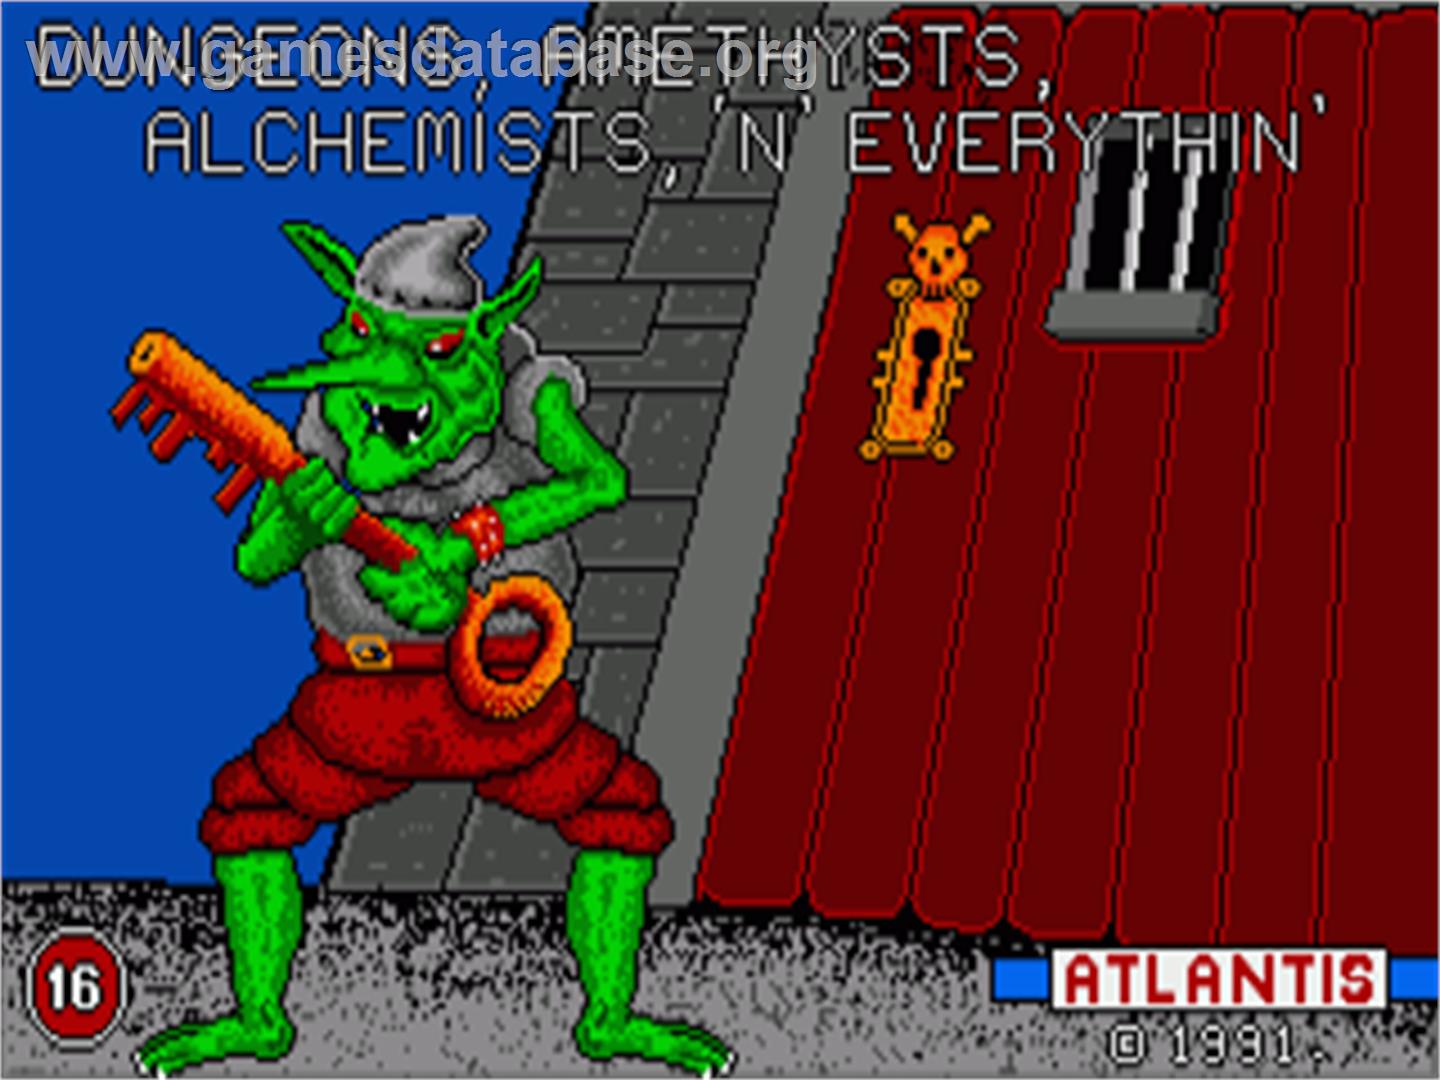 Dungeons, Amethysts, Alchemists 'n' Everythin' - Commodore Amiga - Artwork - Title Screen